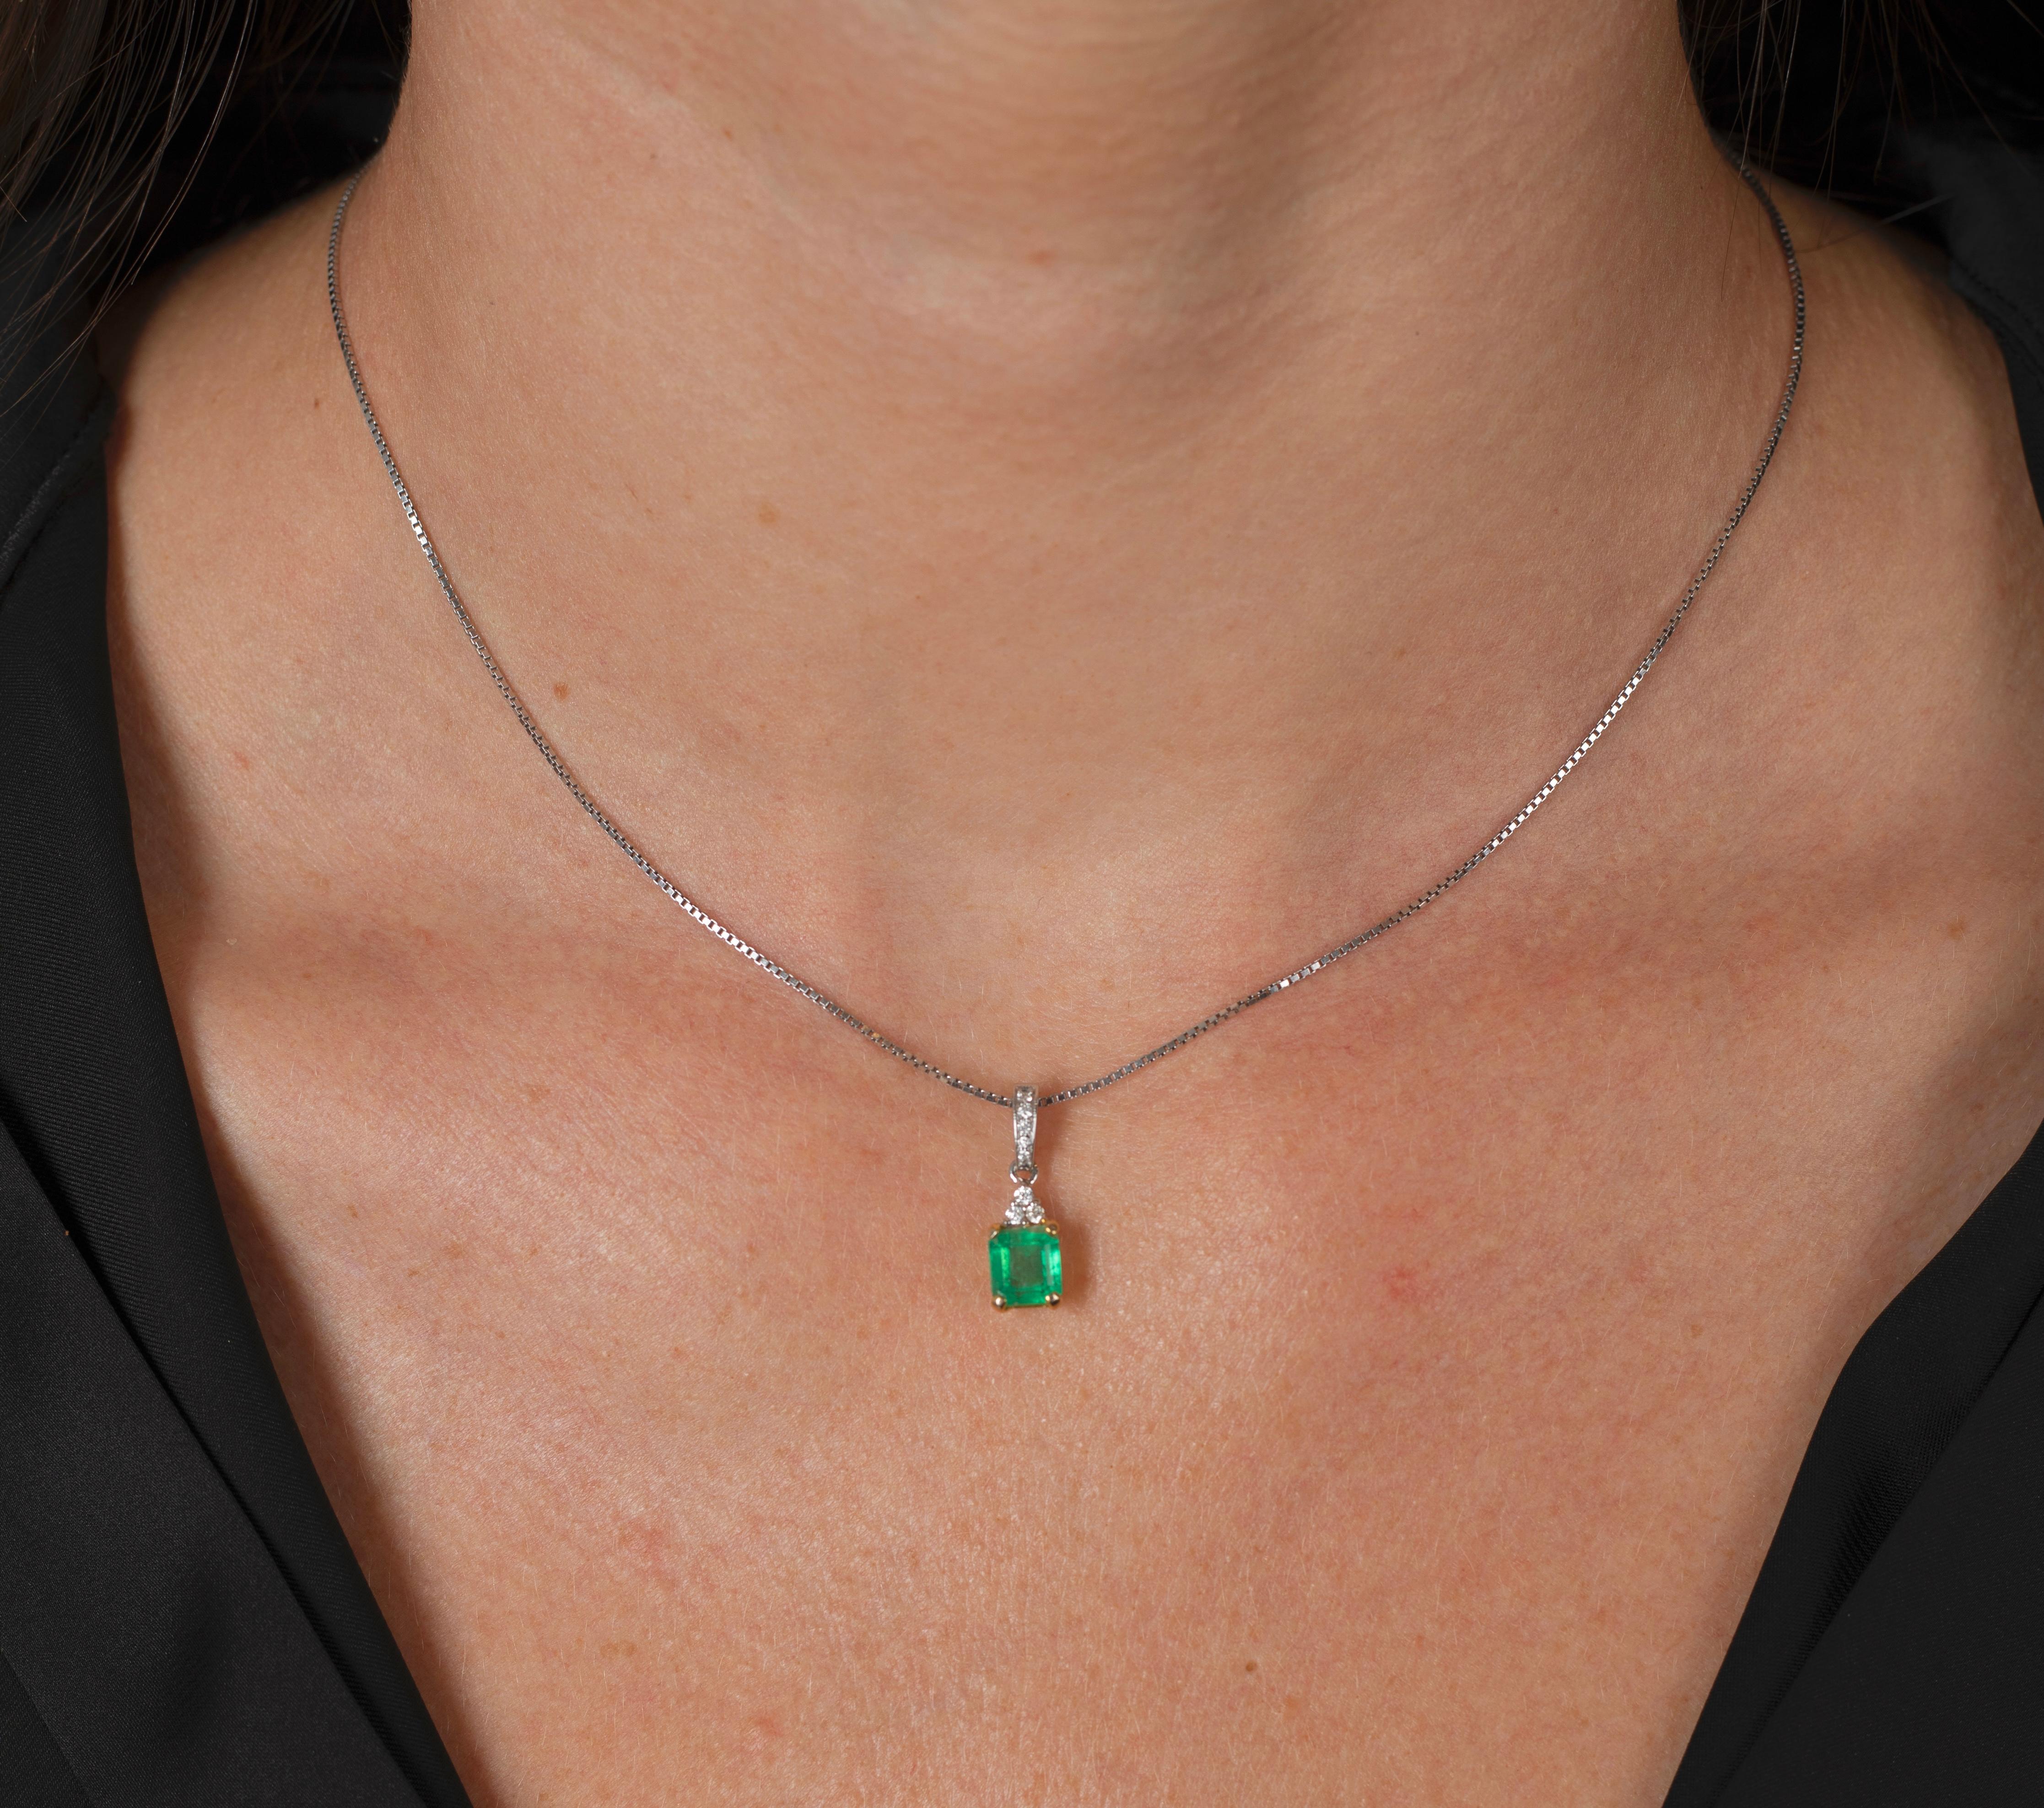 FEATURES: 18K solid gold, natural Colombian emerald, natural mined diamonds, and a certificate of appraisal. 

18-karat solid white and yellow gold pendant mounts a 1.23 carat natural Colombian emerald. The pendant features a dynamic bail that